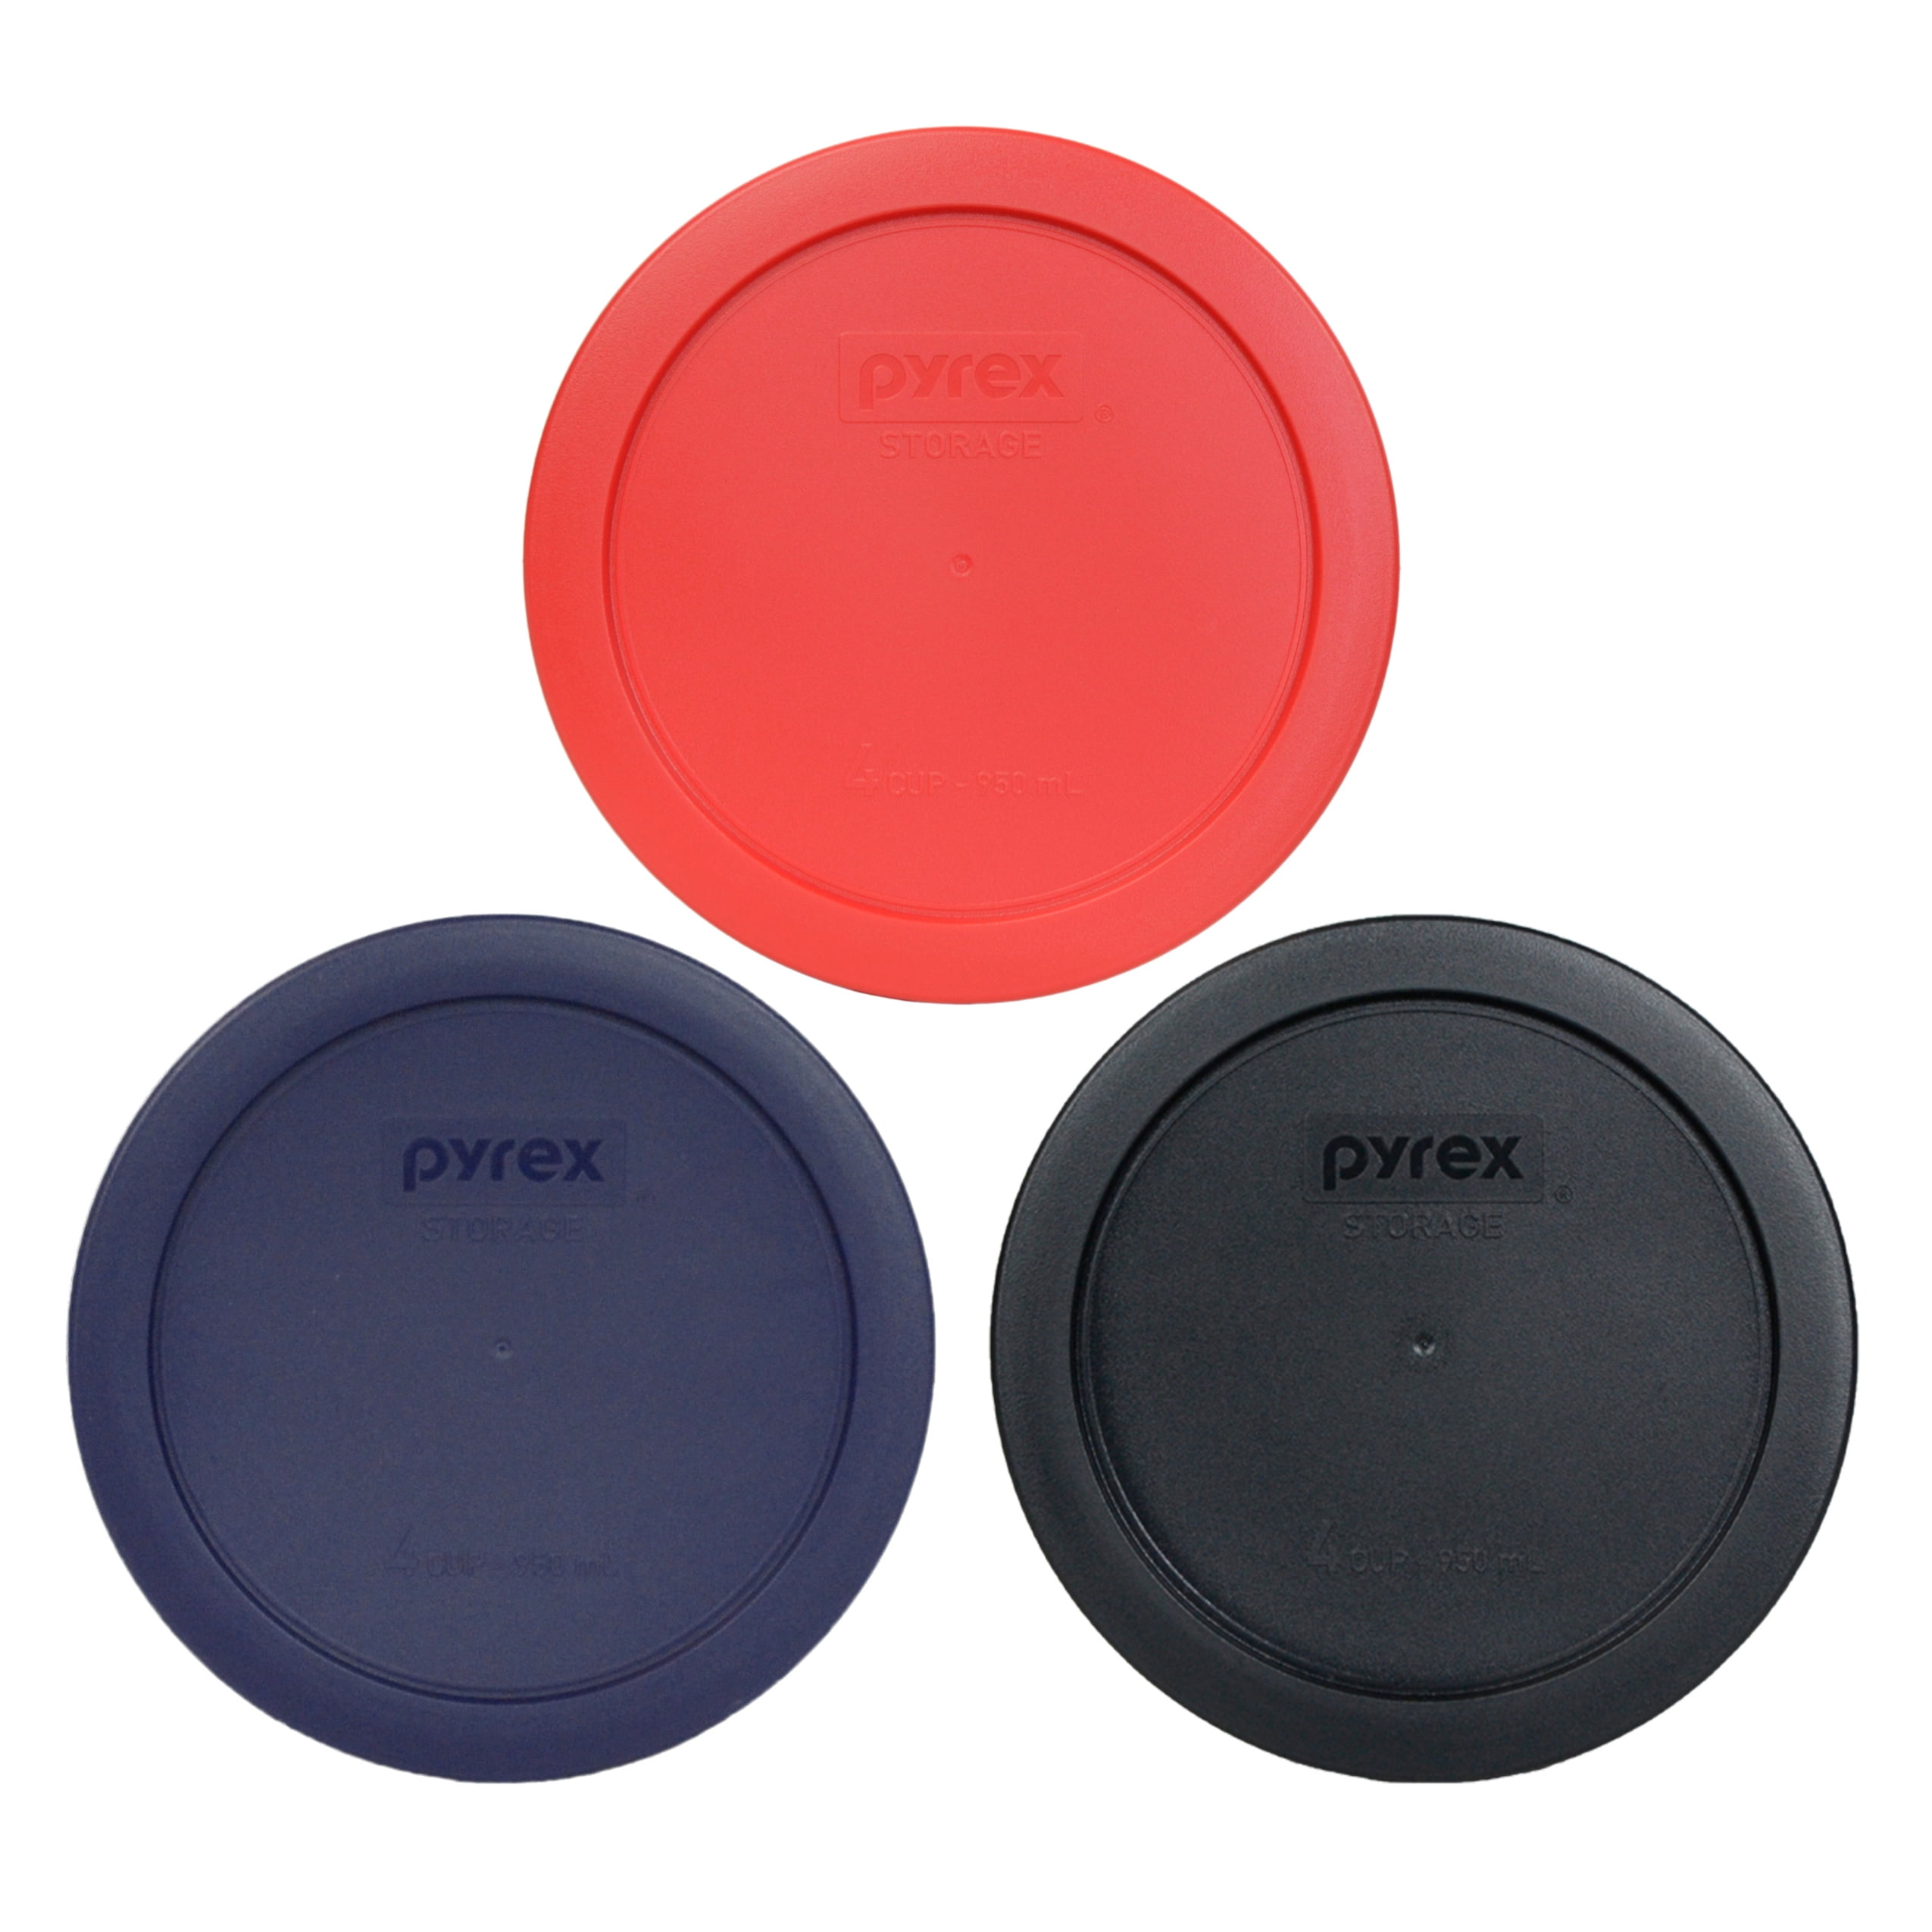 Pyrex 7201-PC 6" Red Round Replacement Cover Lid New for 4 Cup Glass Bowl 6PK 